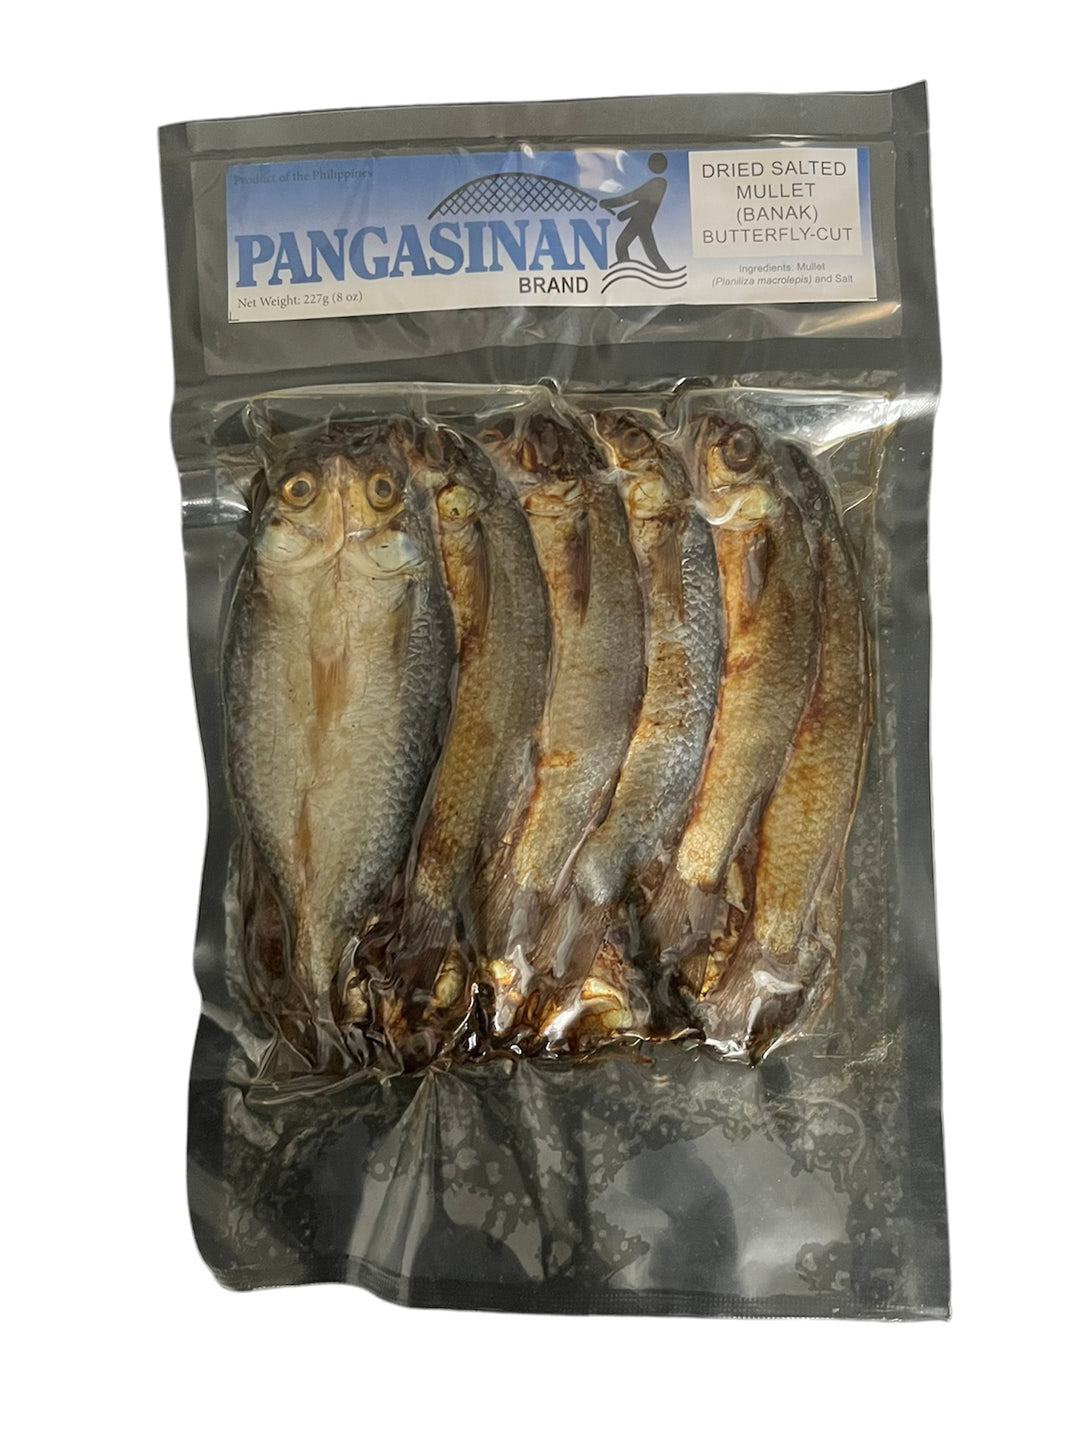 Pangasinan-Dried Salted Mullet-BANAK Butterfly Cut 8 oz